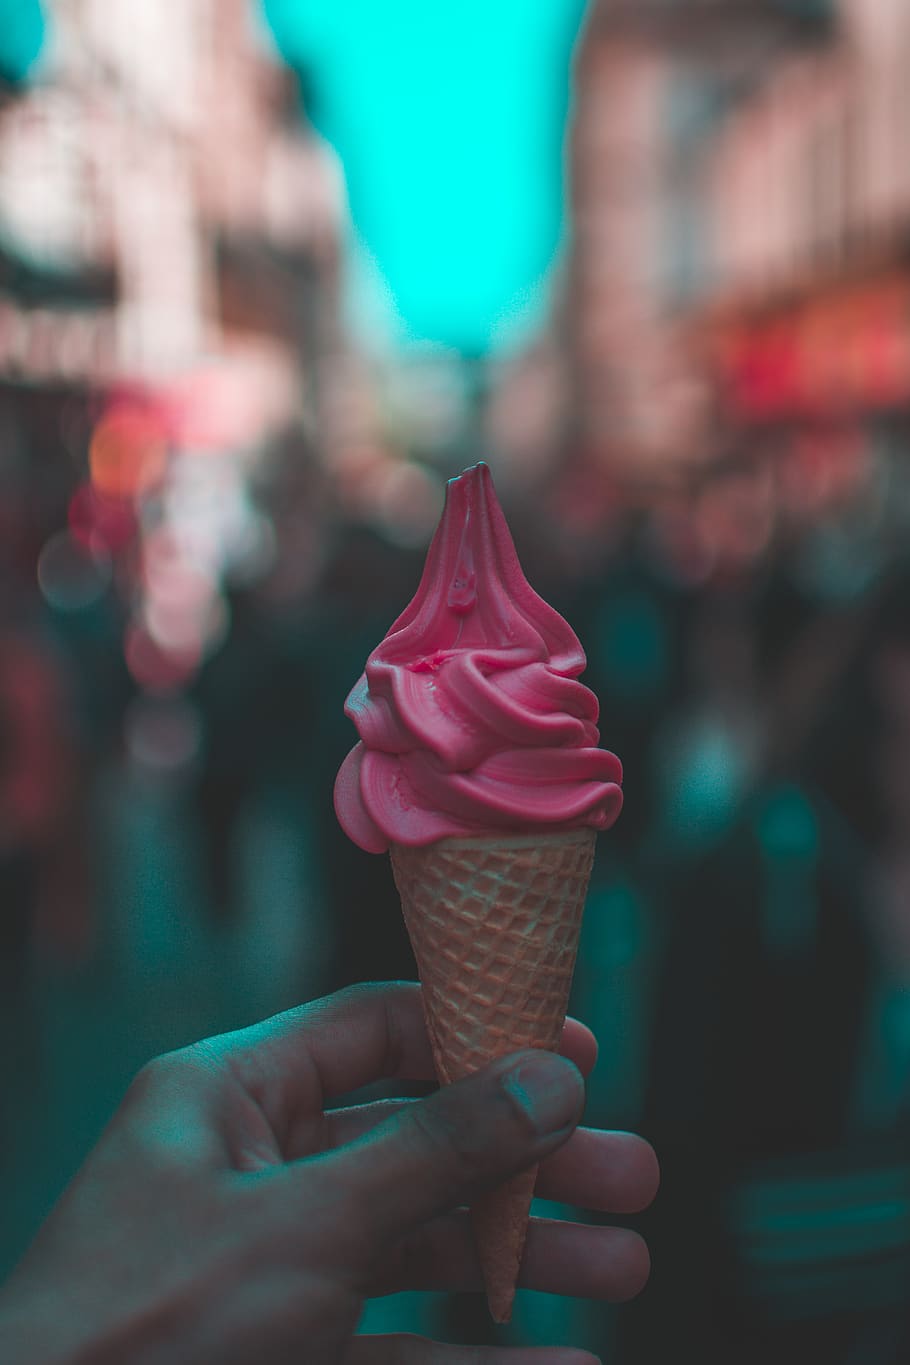 Person Holding Strawberry Ice Cream, blurred background, colors